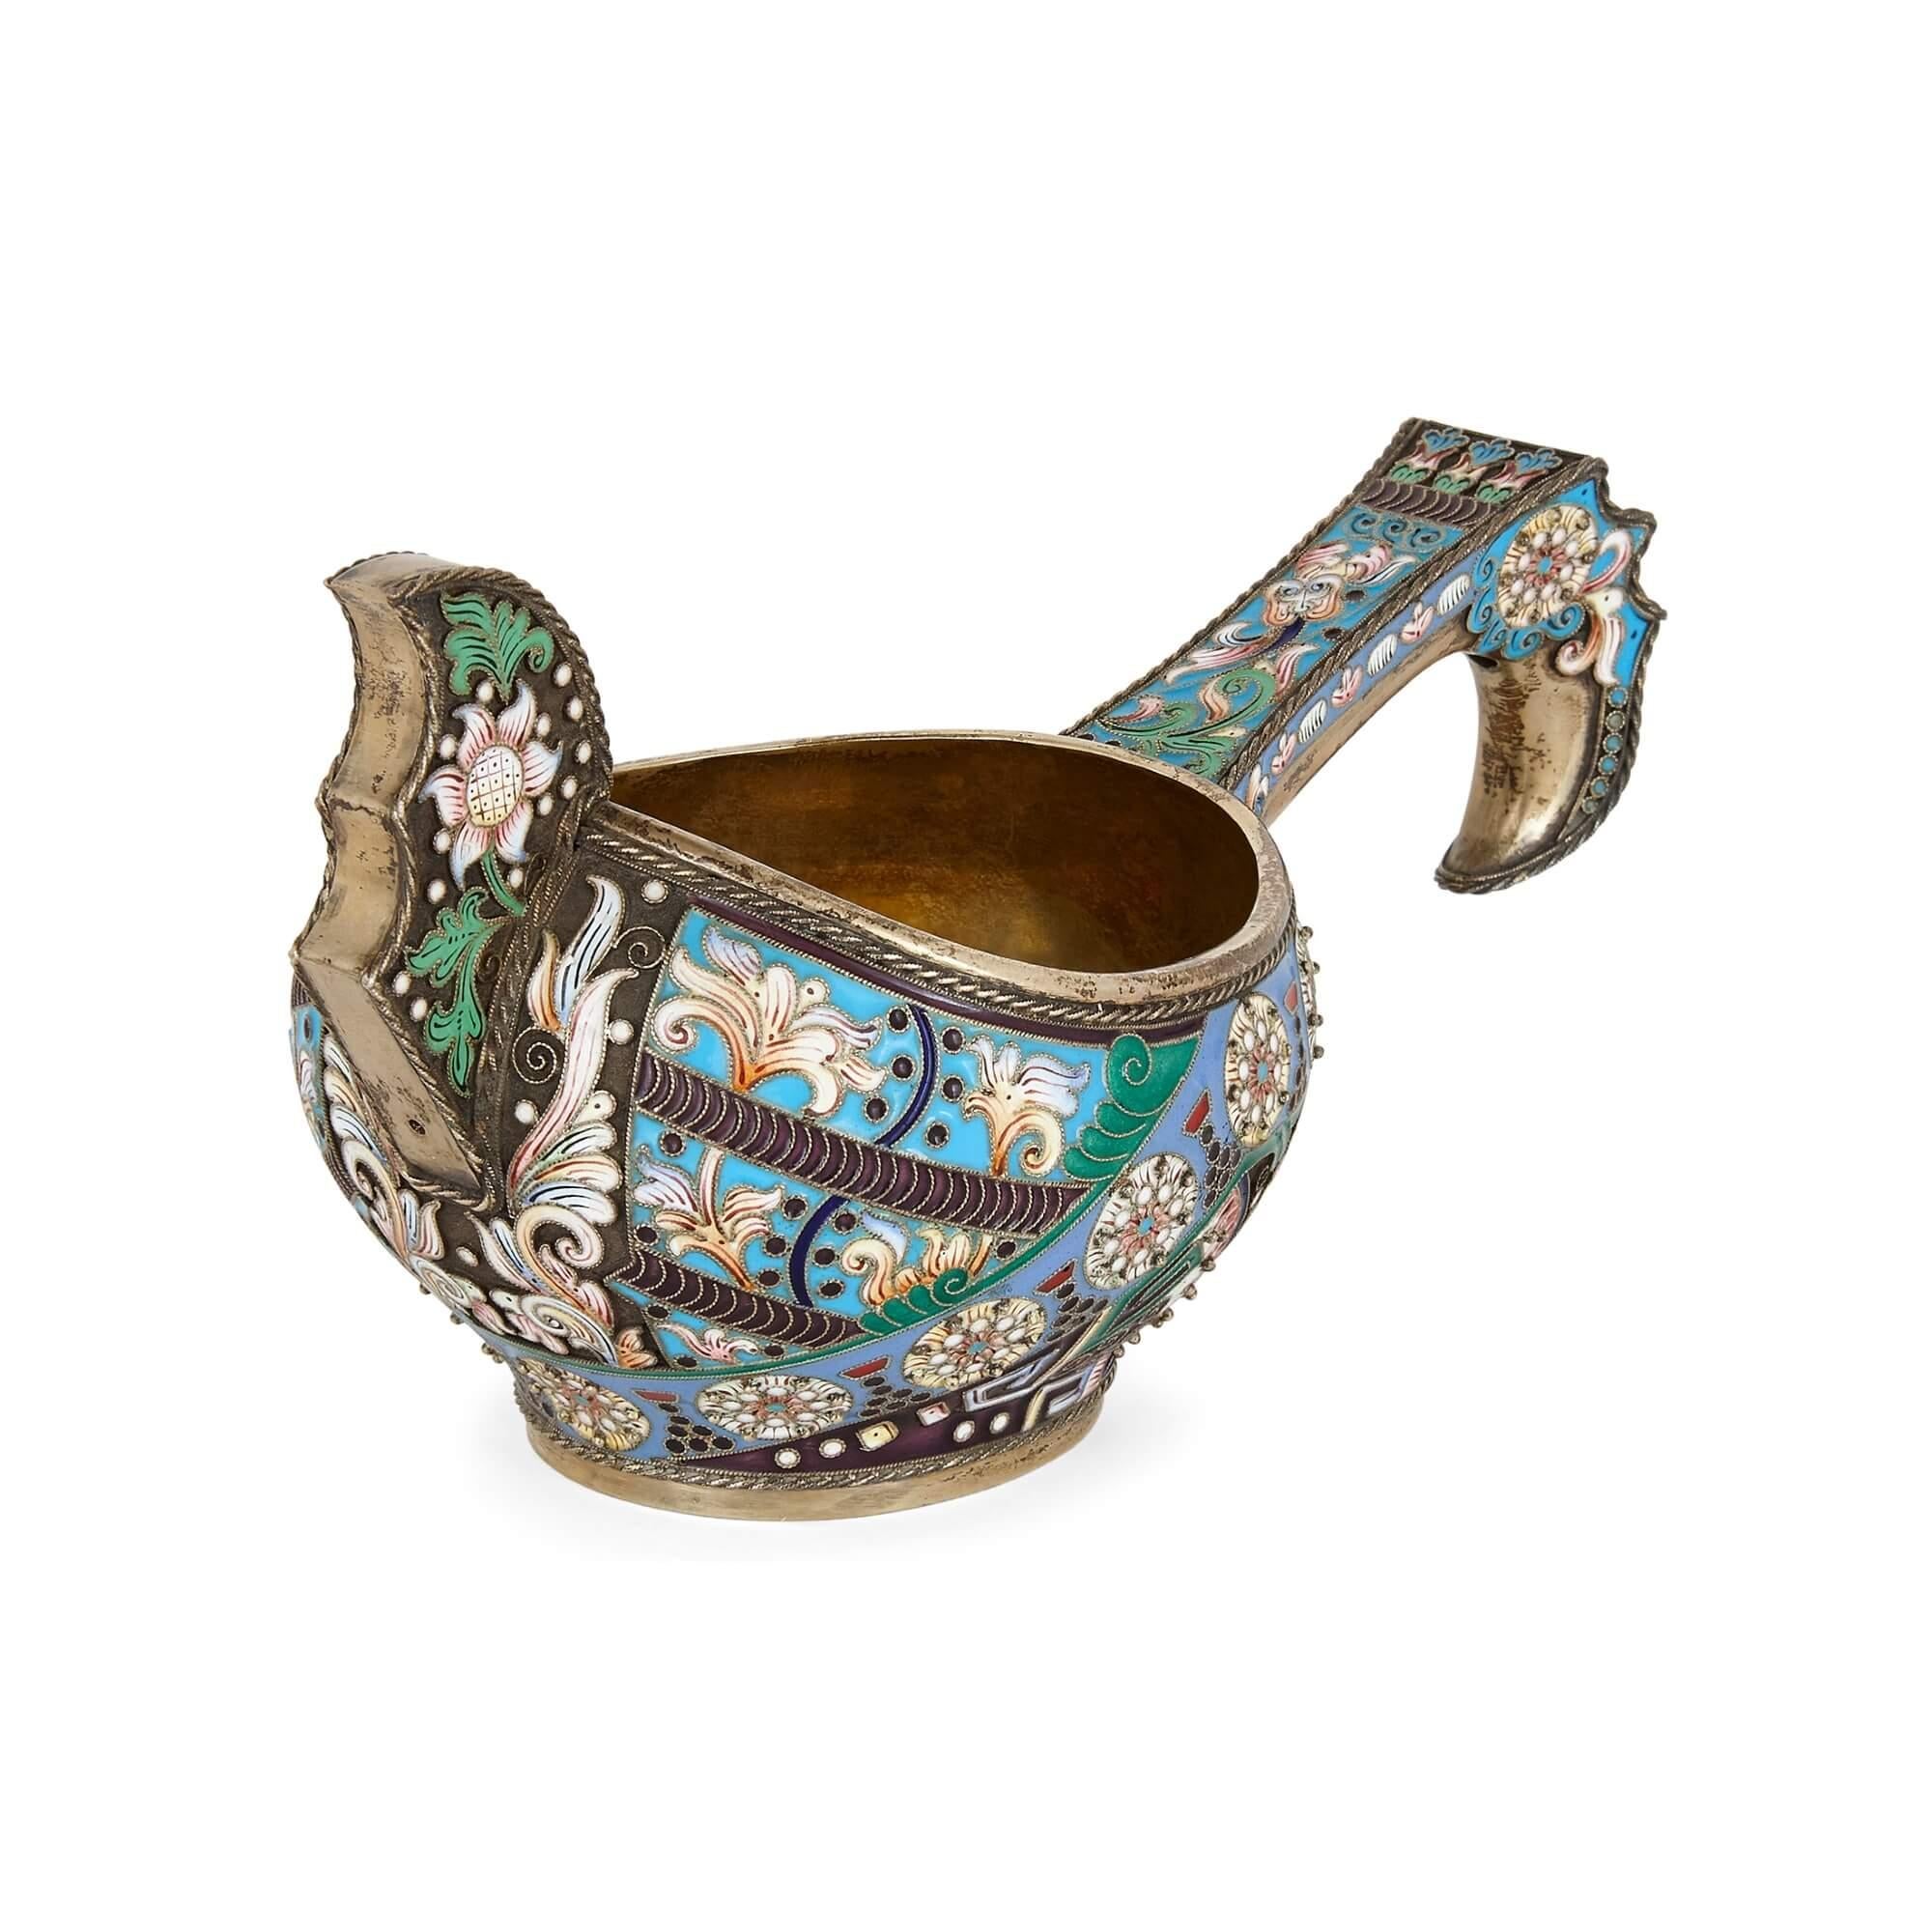 Russian vermeil and cloisonné enamel water-bird kovsch
Russian, 20th Century
Height 8cm, width 16cm, depth 7cm

This fine and splendid Russian kovsch is cast in vermeil, and shaped as a stylised water bird. The kovsch features a small tail and an